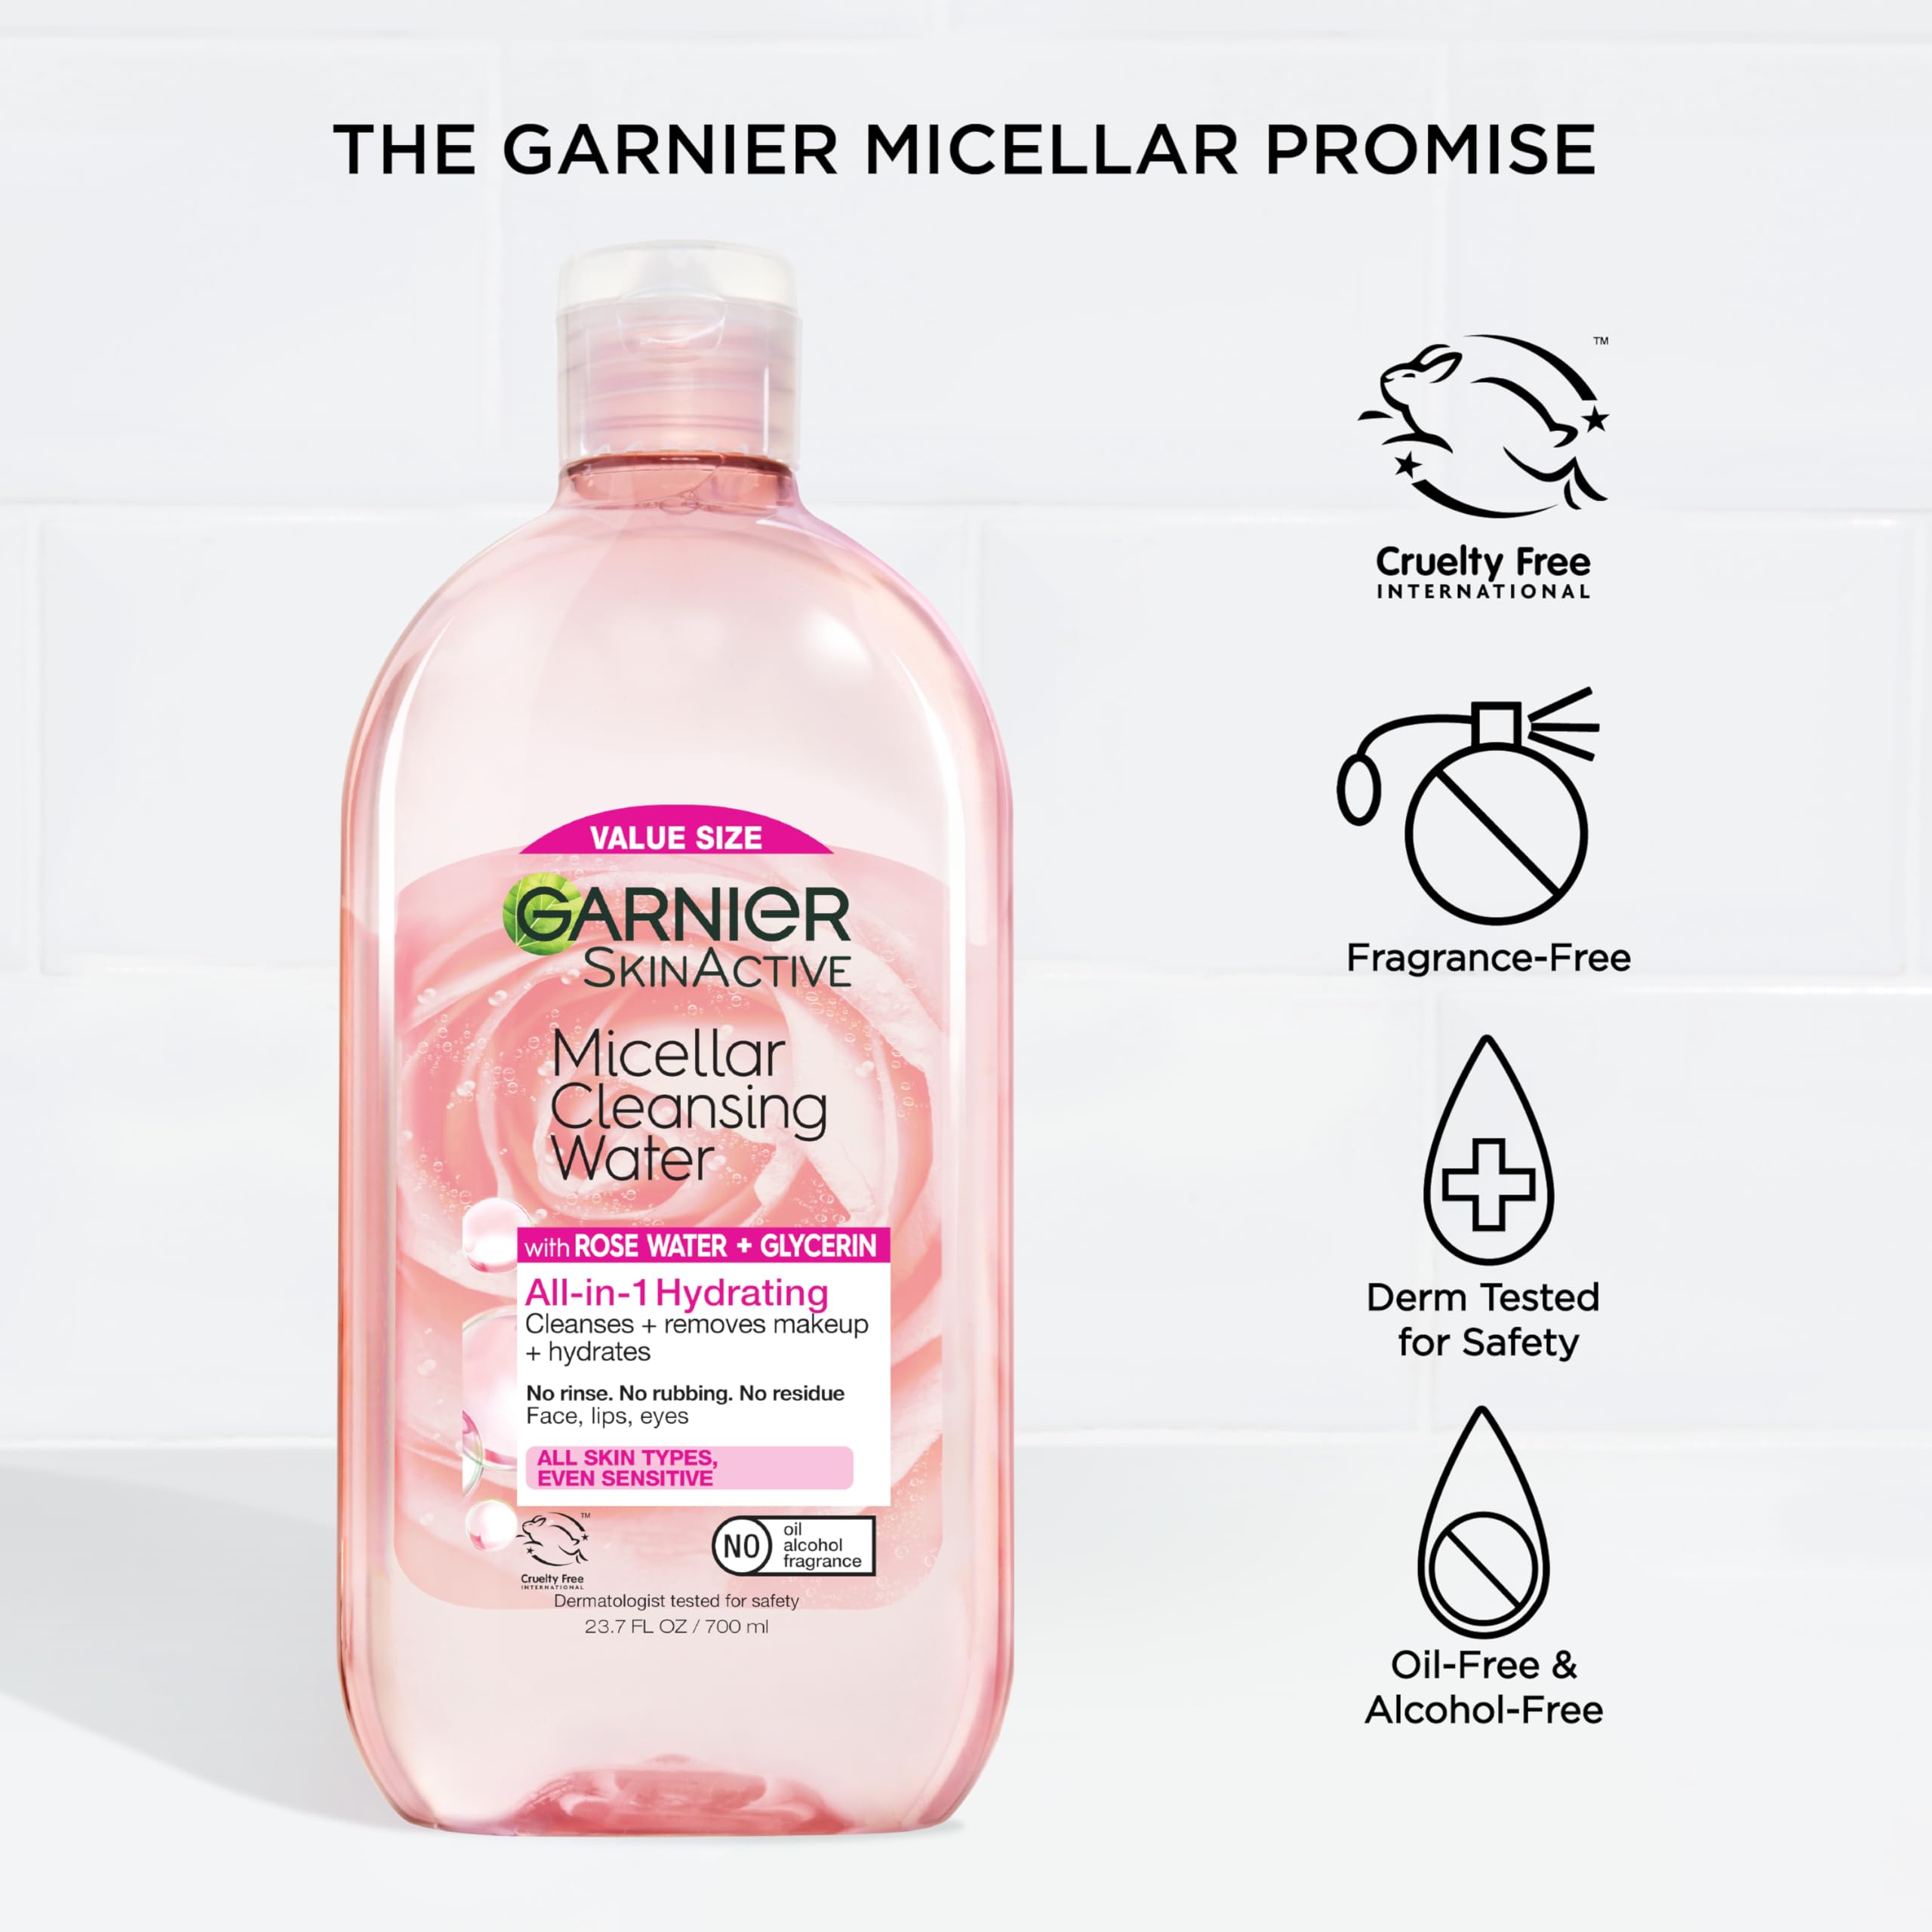 Garnier SkinActive Micellar Water with Rose Water, Hydrating Facial Cleanser and Makeup Remover, 23.7 Fl Oz